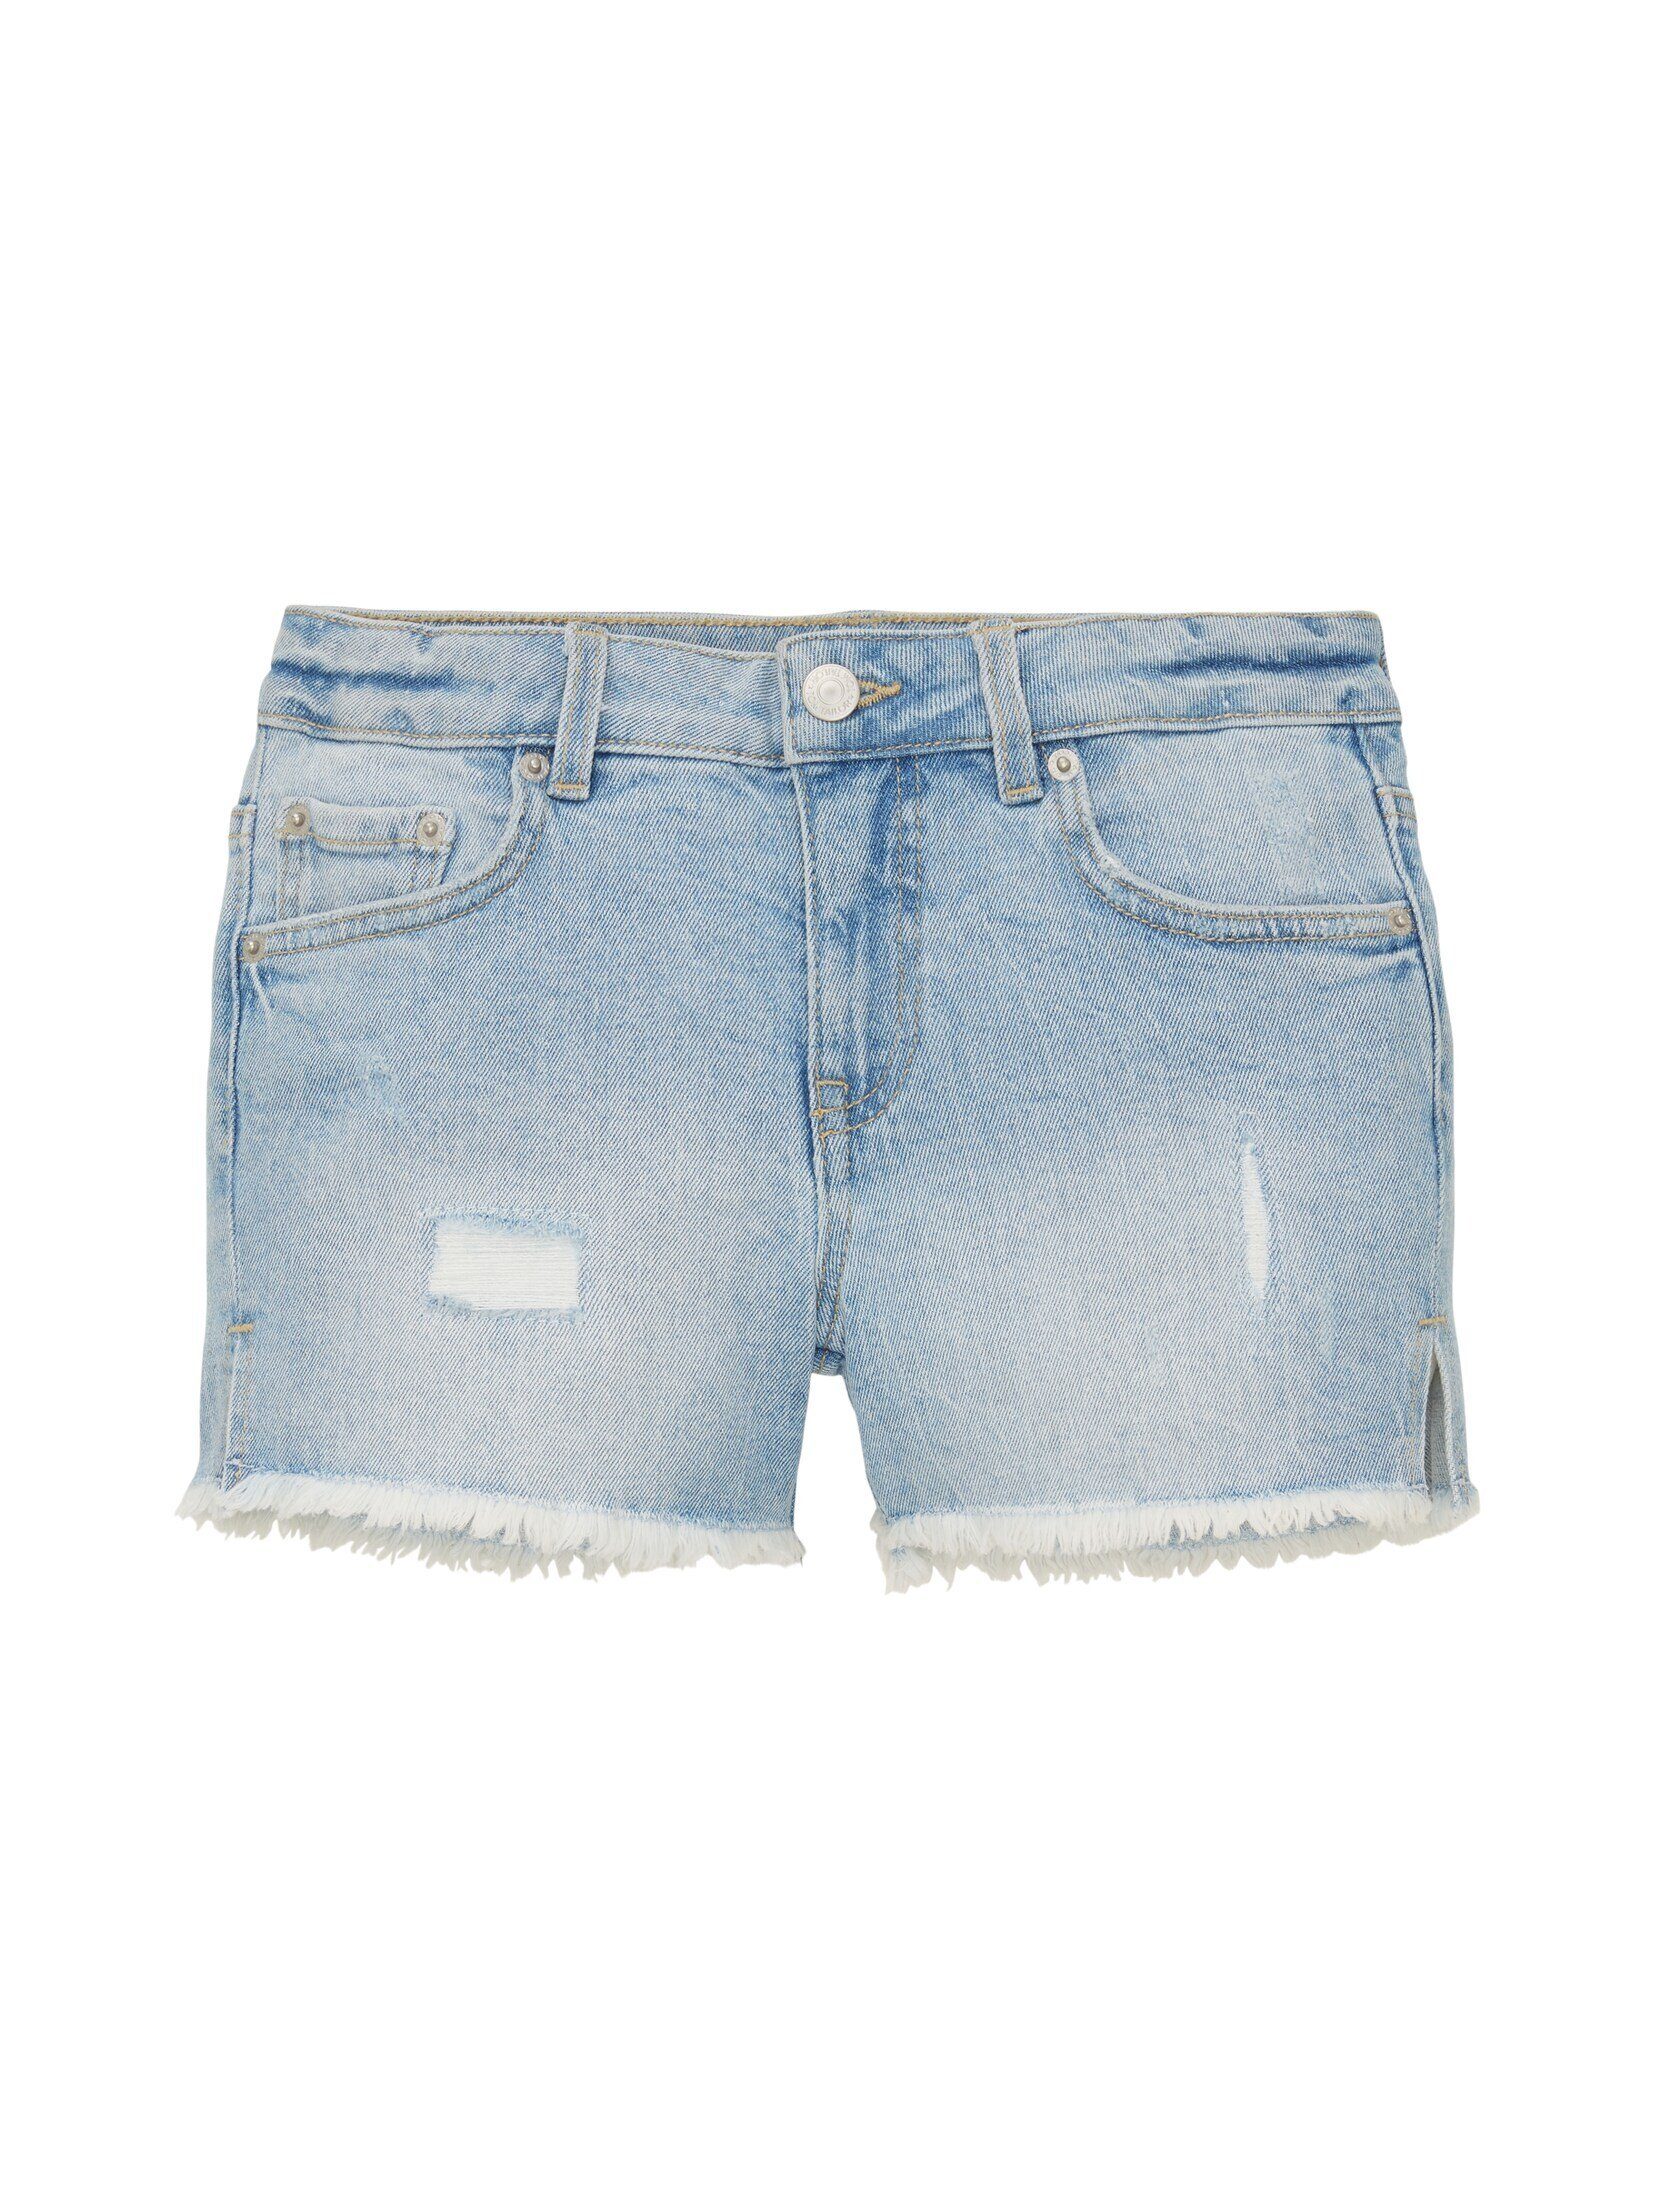 TOM TAILOR Jeansshorts Jeans Shorts im Used-Look